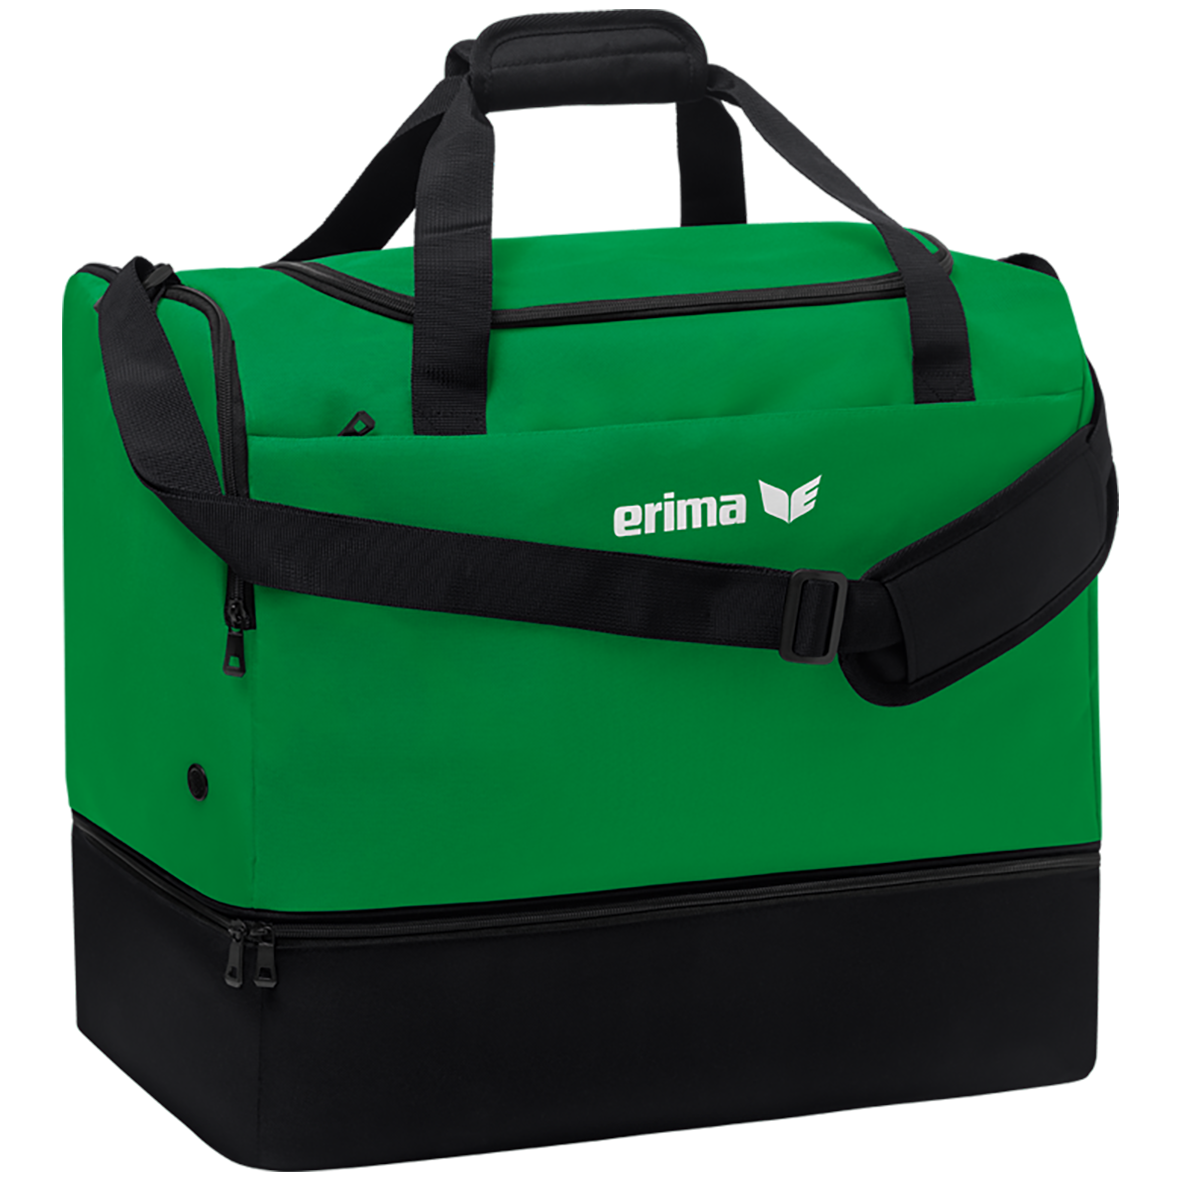 ERIMA TEAM SPORTS BAG WITH BOTTOM COMPARTMENT, EMERALD.